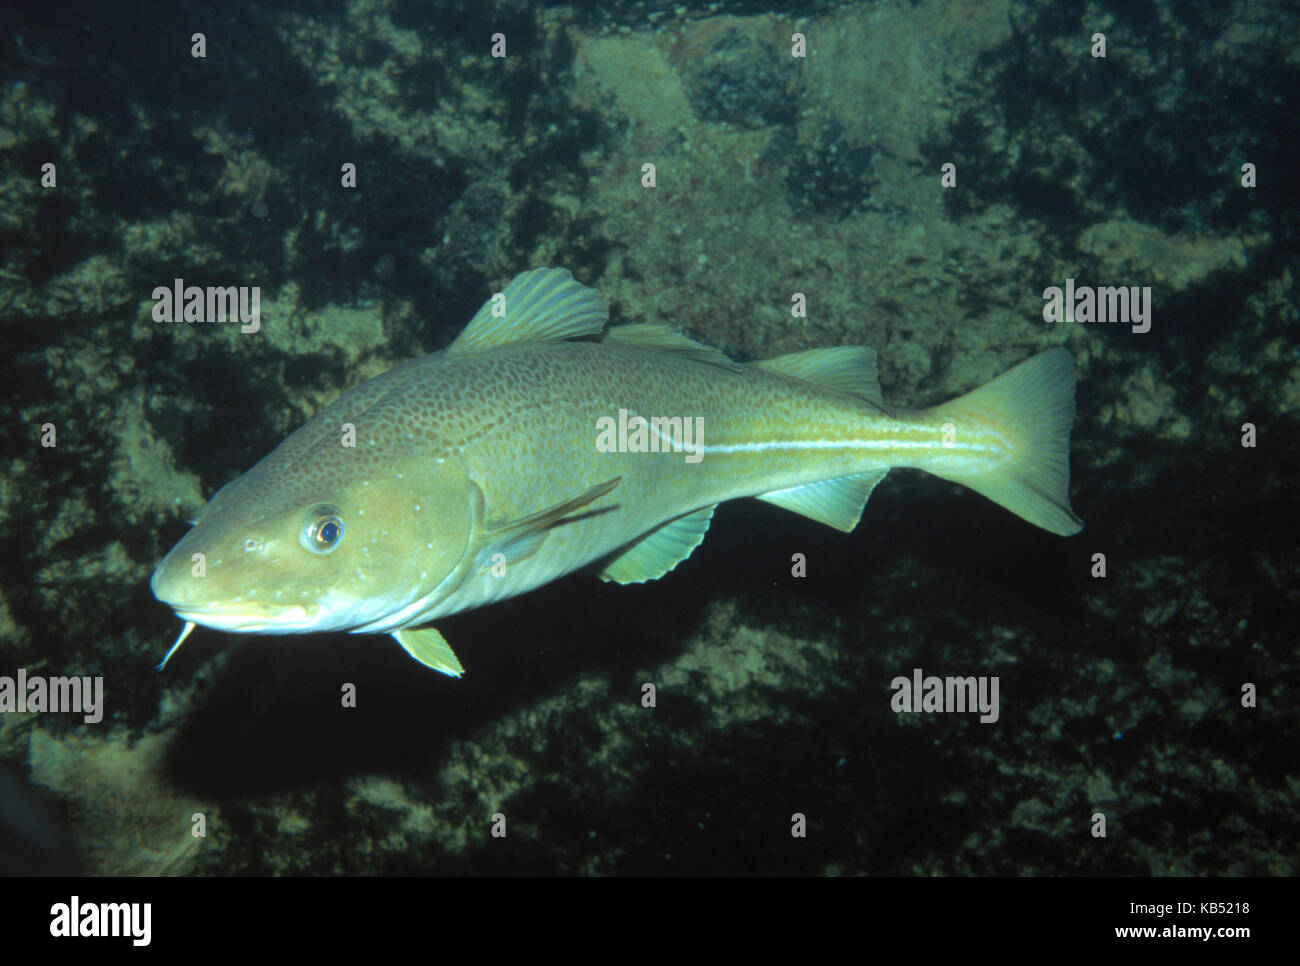 Atlantic Cod (Gadus morhua) swimming showing prominent barbule on lower lip, widely fished in Atlantic Ocean for human consumption, Europe, Europe Stock Photo